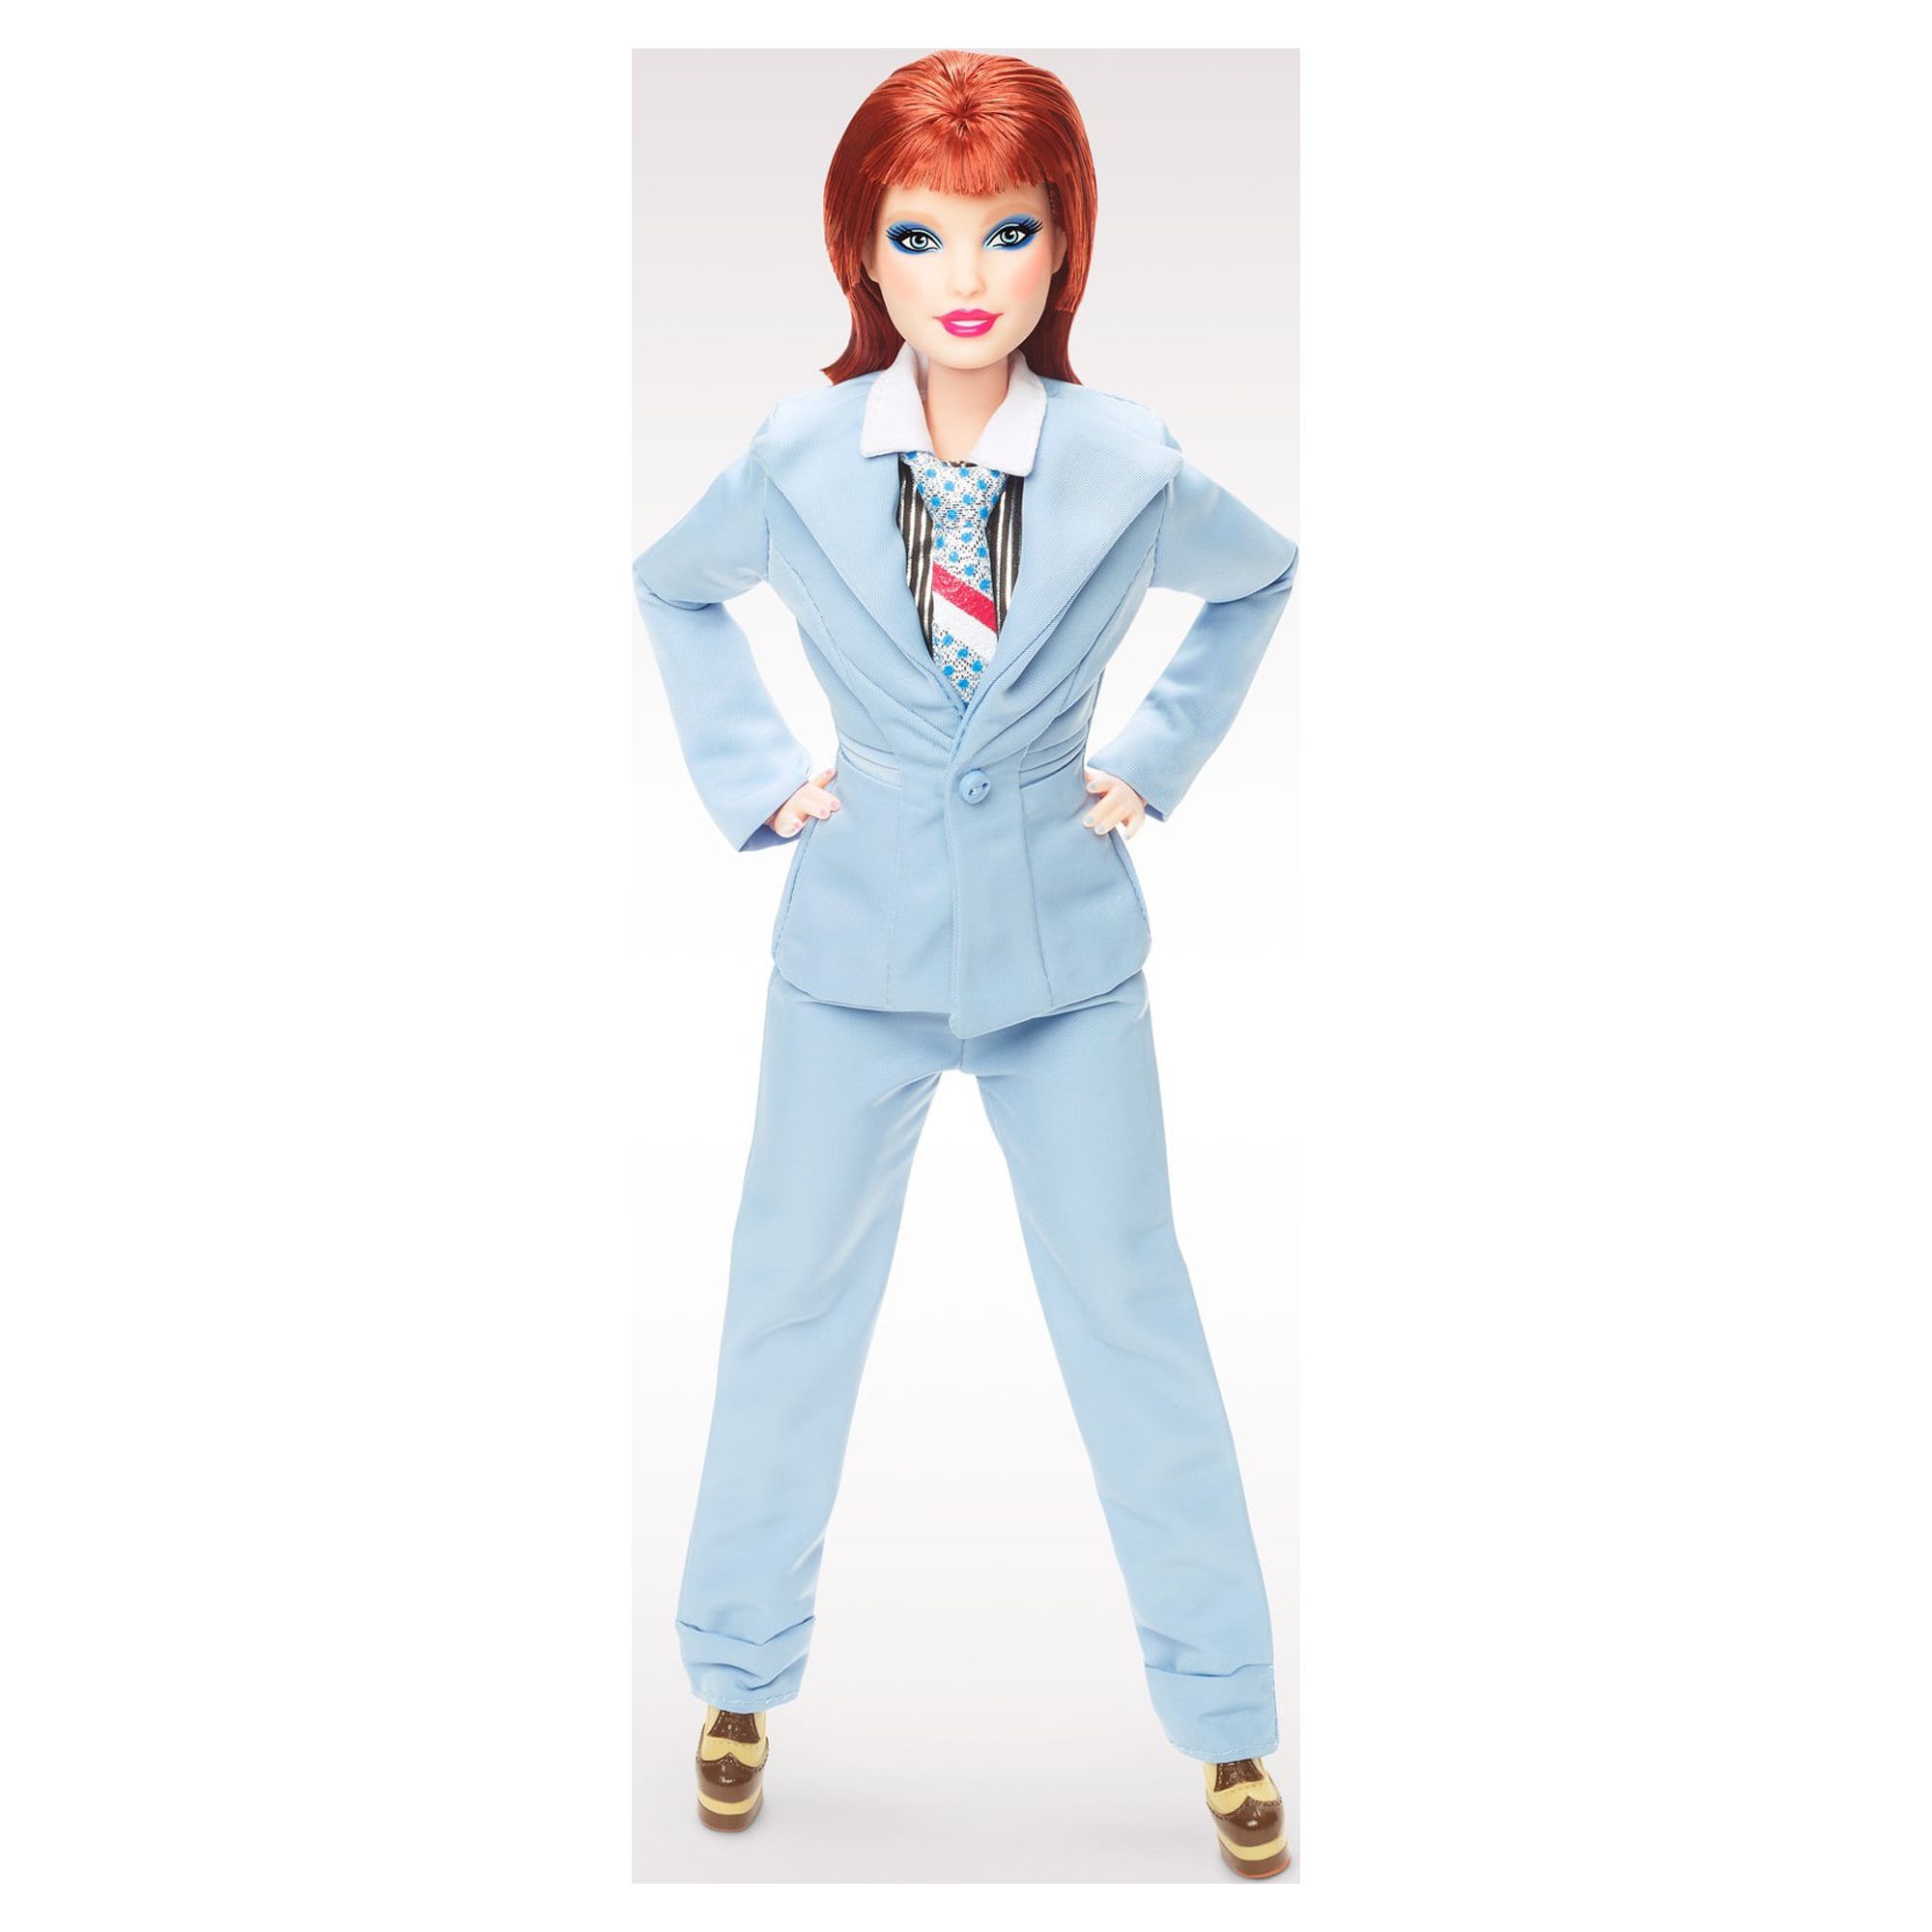 Barbie Signature David Bowie Barbie Doll, Posable, Gift for Collectors - image 3 of 7